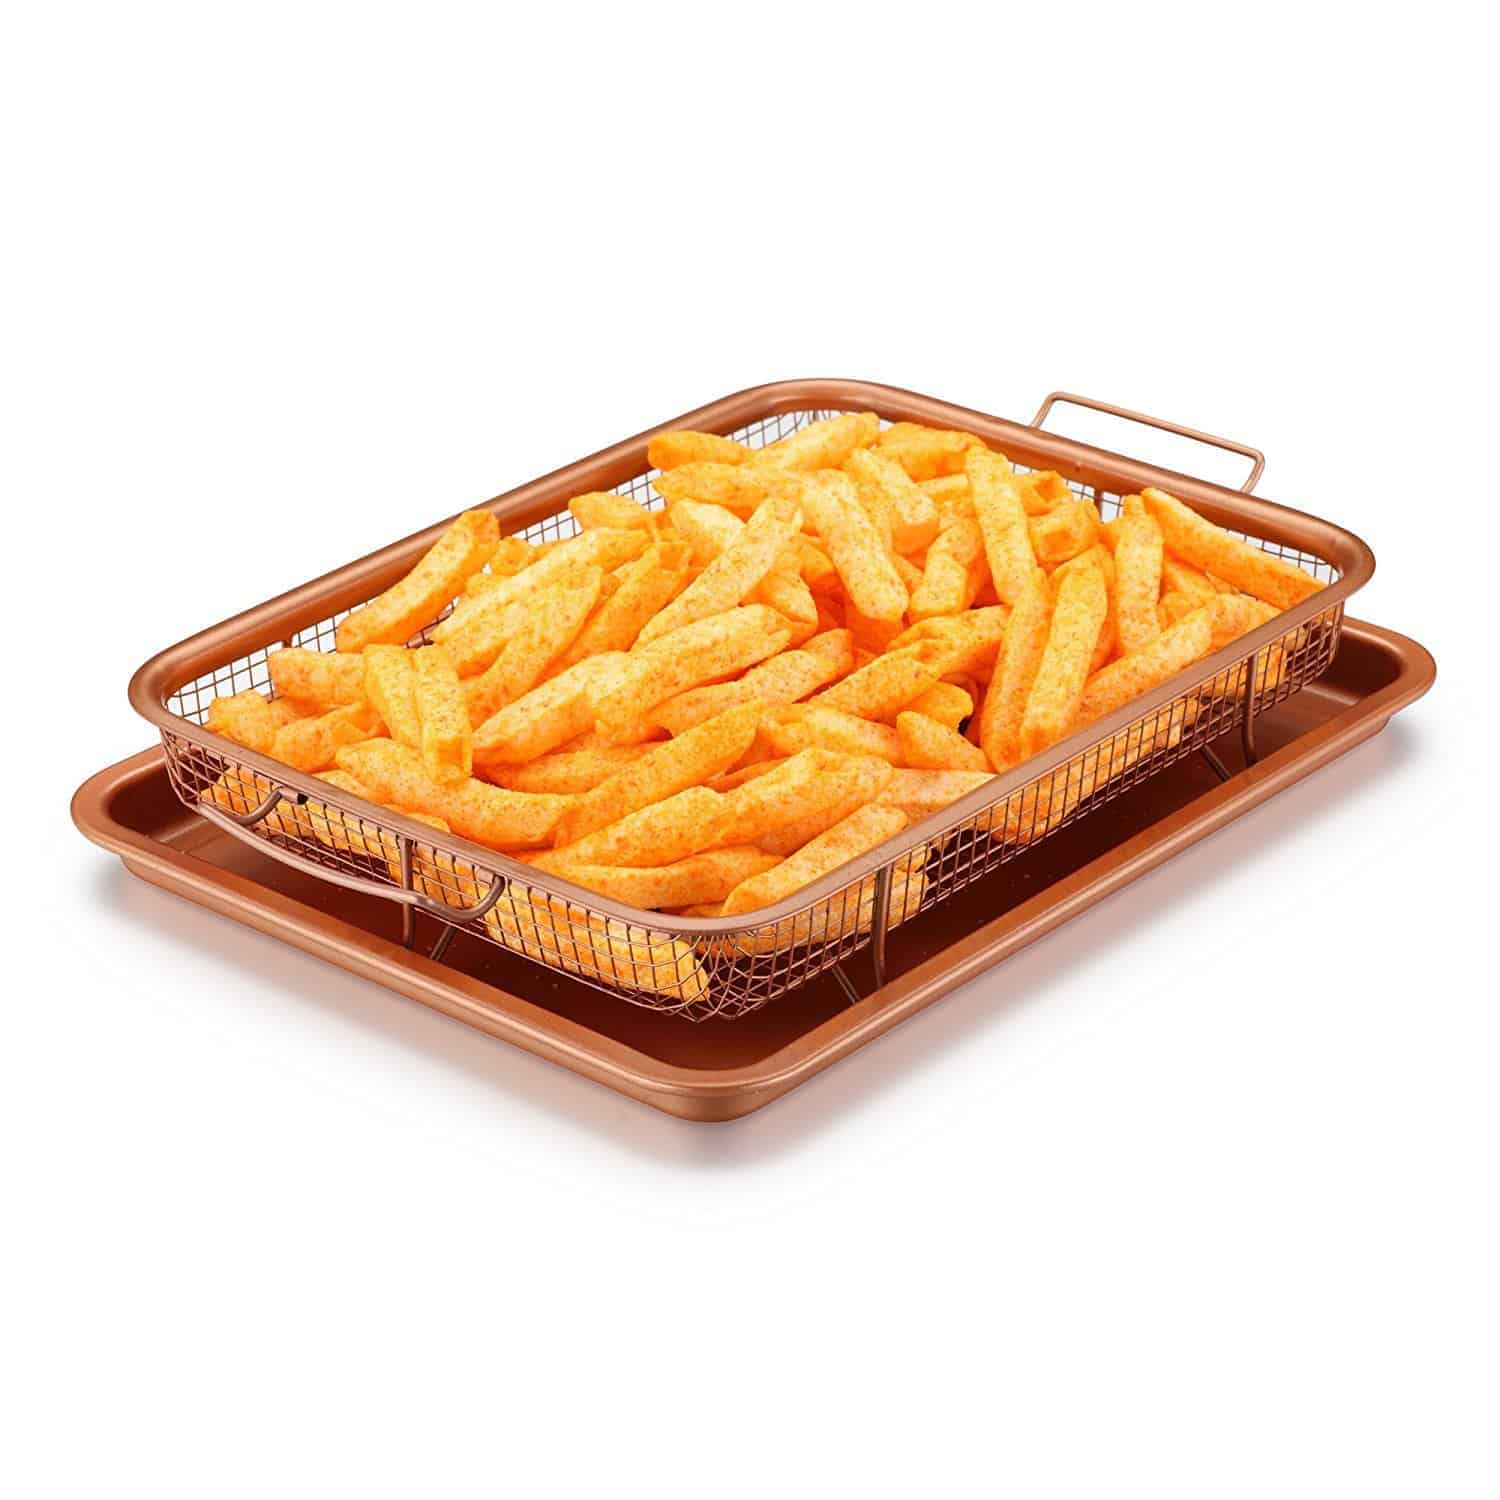 Copper Chef Crisper Tray – Non-Stick Cookie Sheet Tray and Air Fry Mesh Basket Set